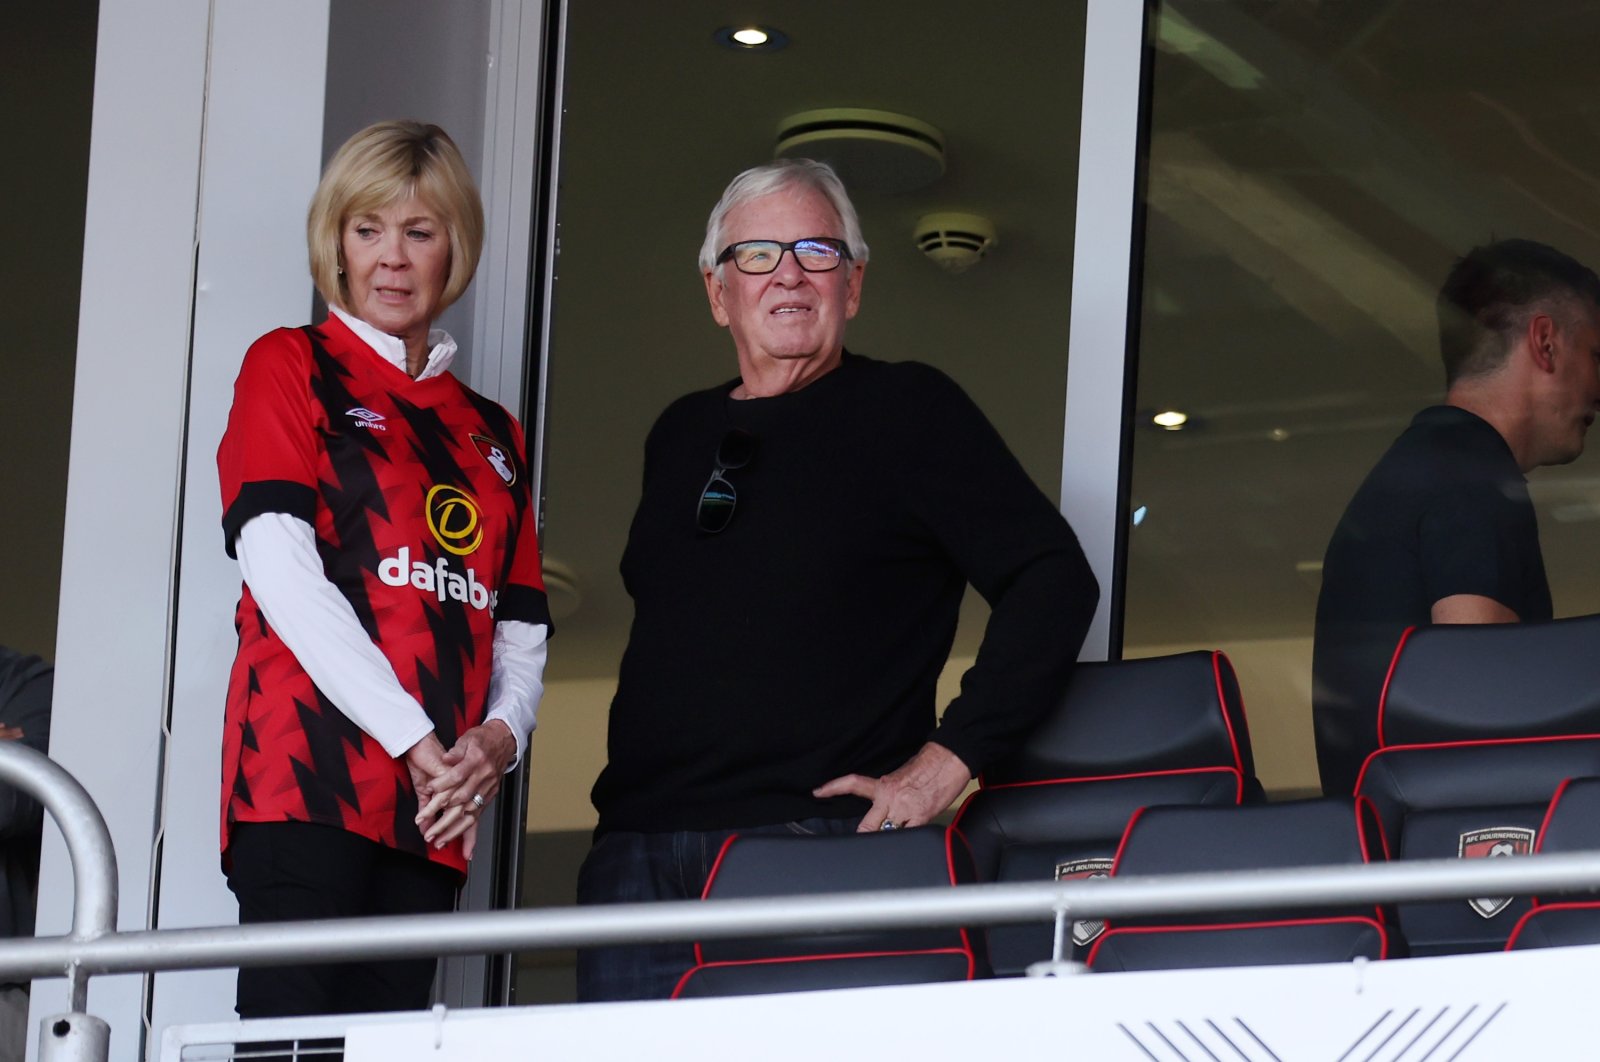 American businessperson Bill Foley looks on prior to the Premier League match between AFC Bournemouth and Leicester City at Vitality Stadium, Bournemouth, England, Oct. 8, 2022. (Getty Images Photo)